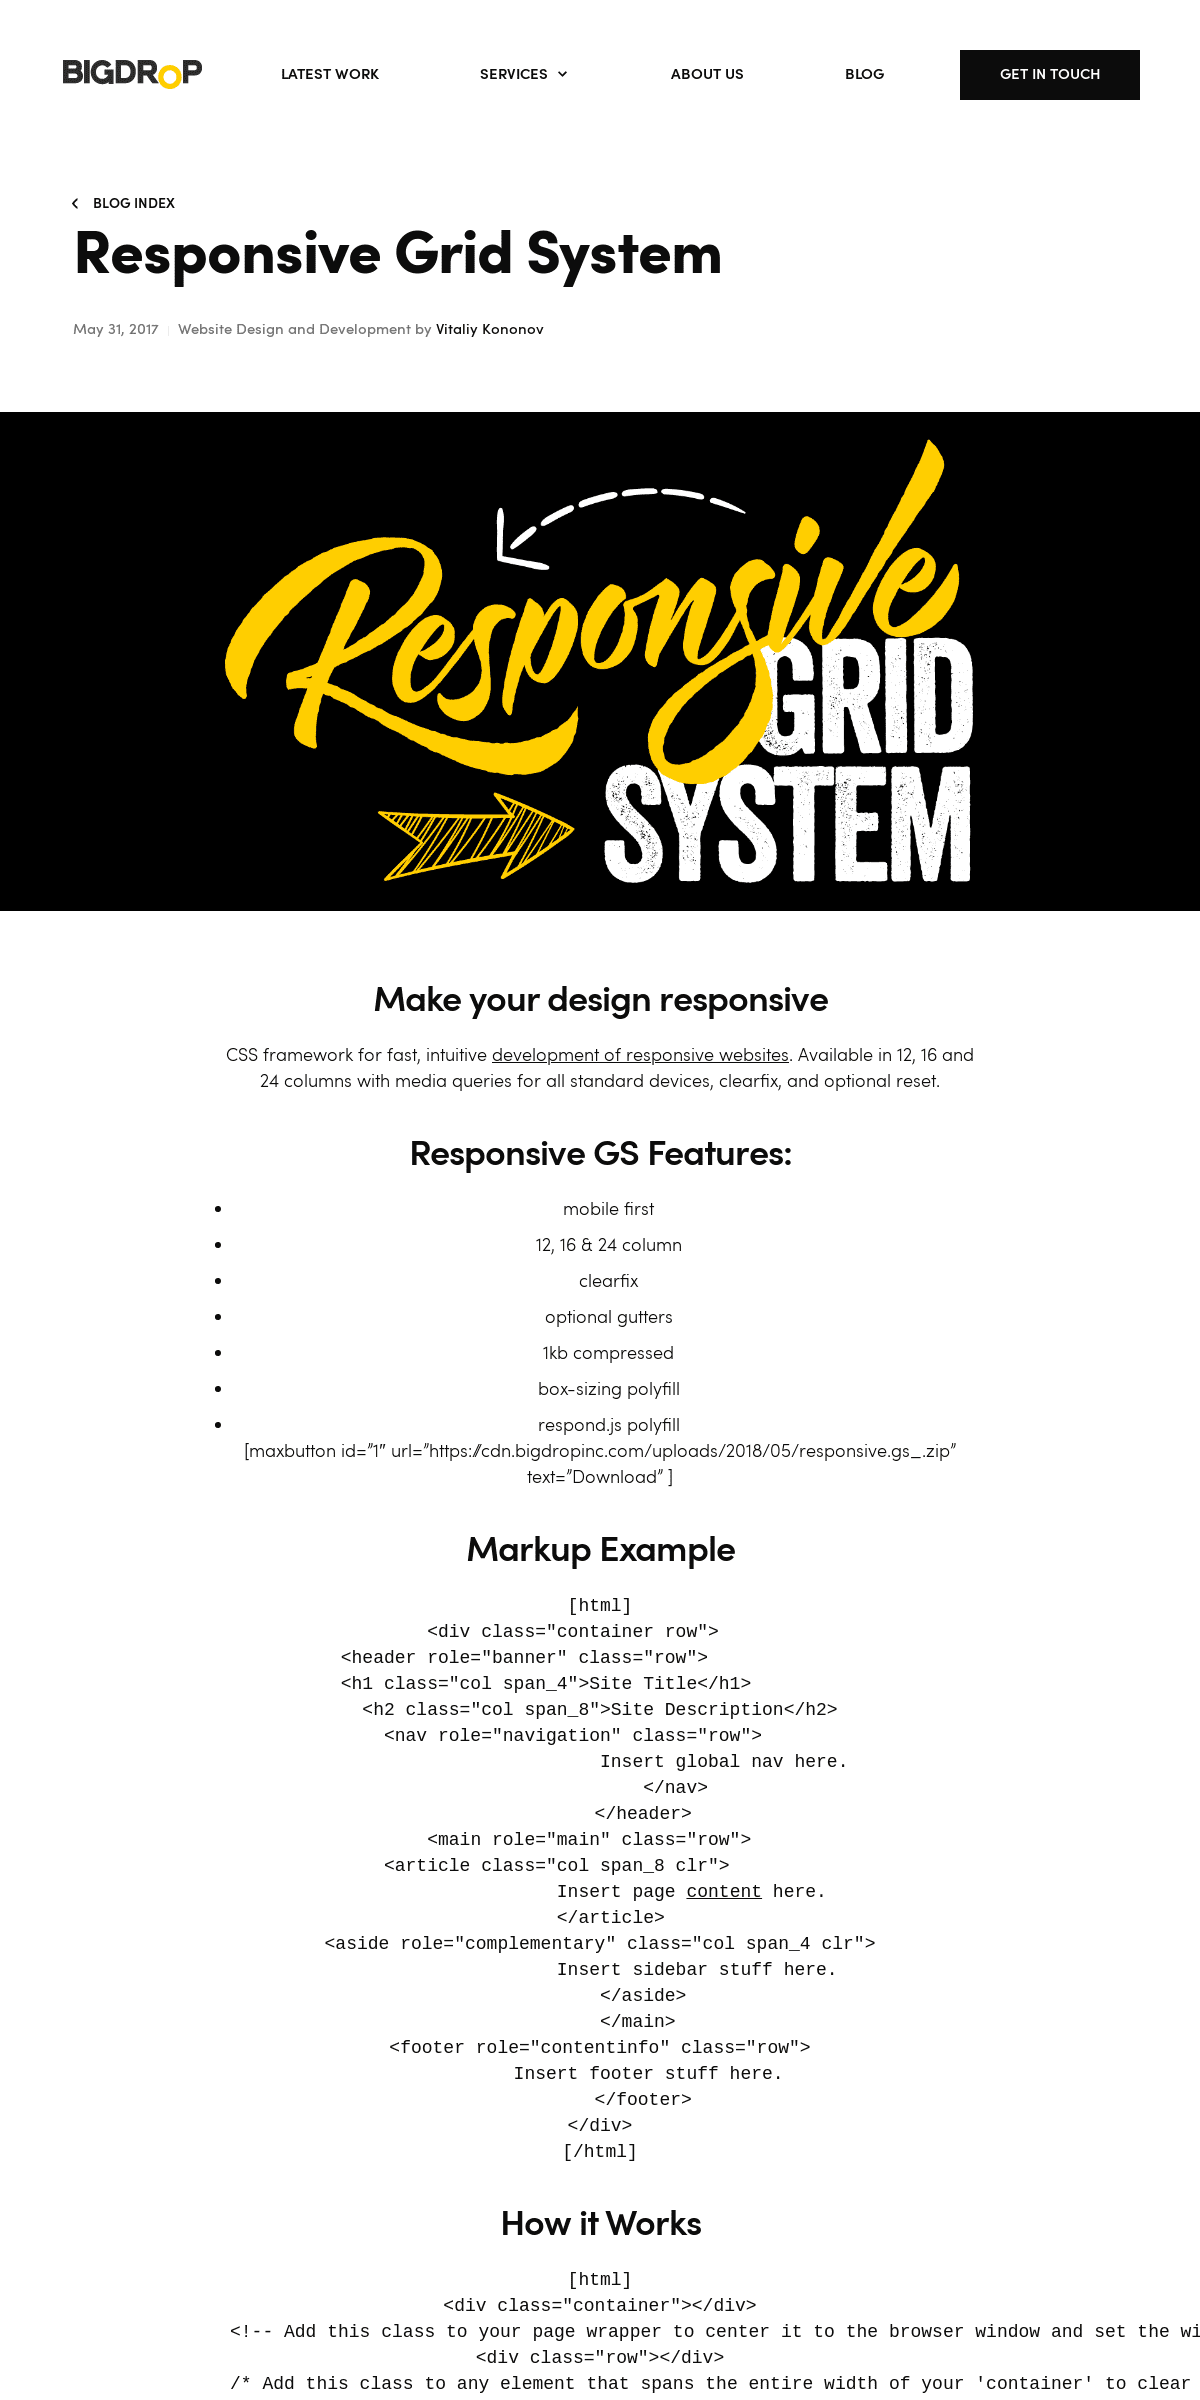 A complete backup of responsive.gs